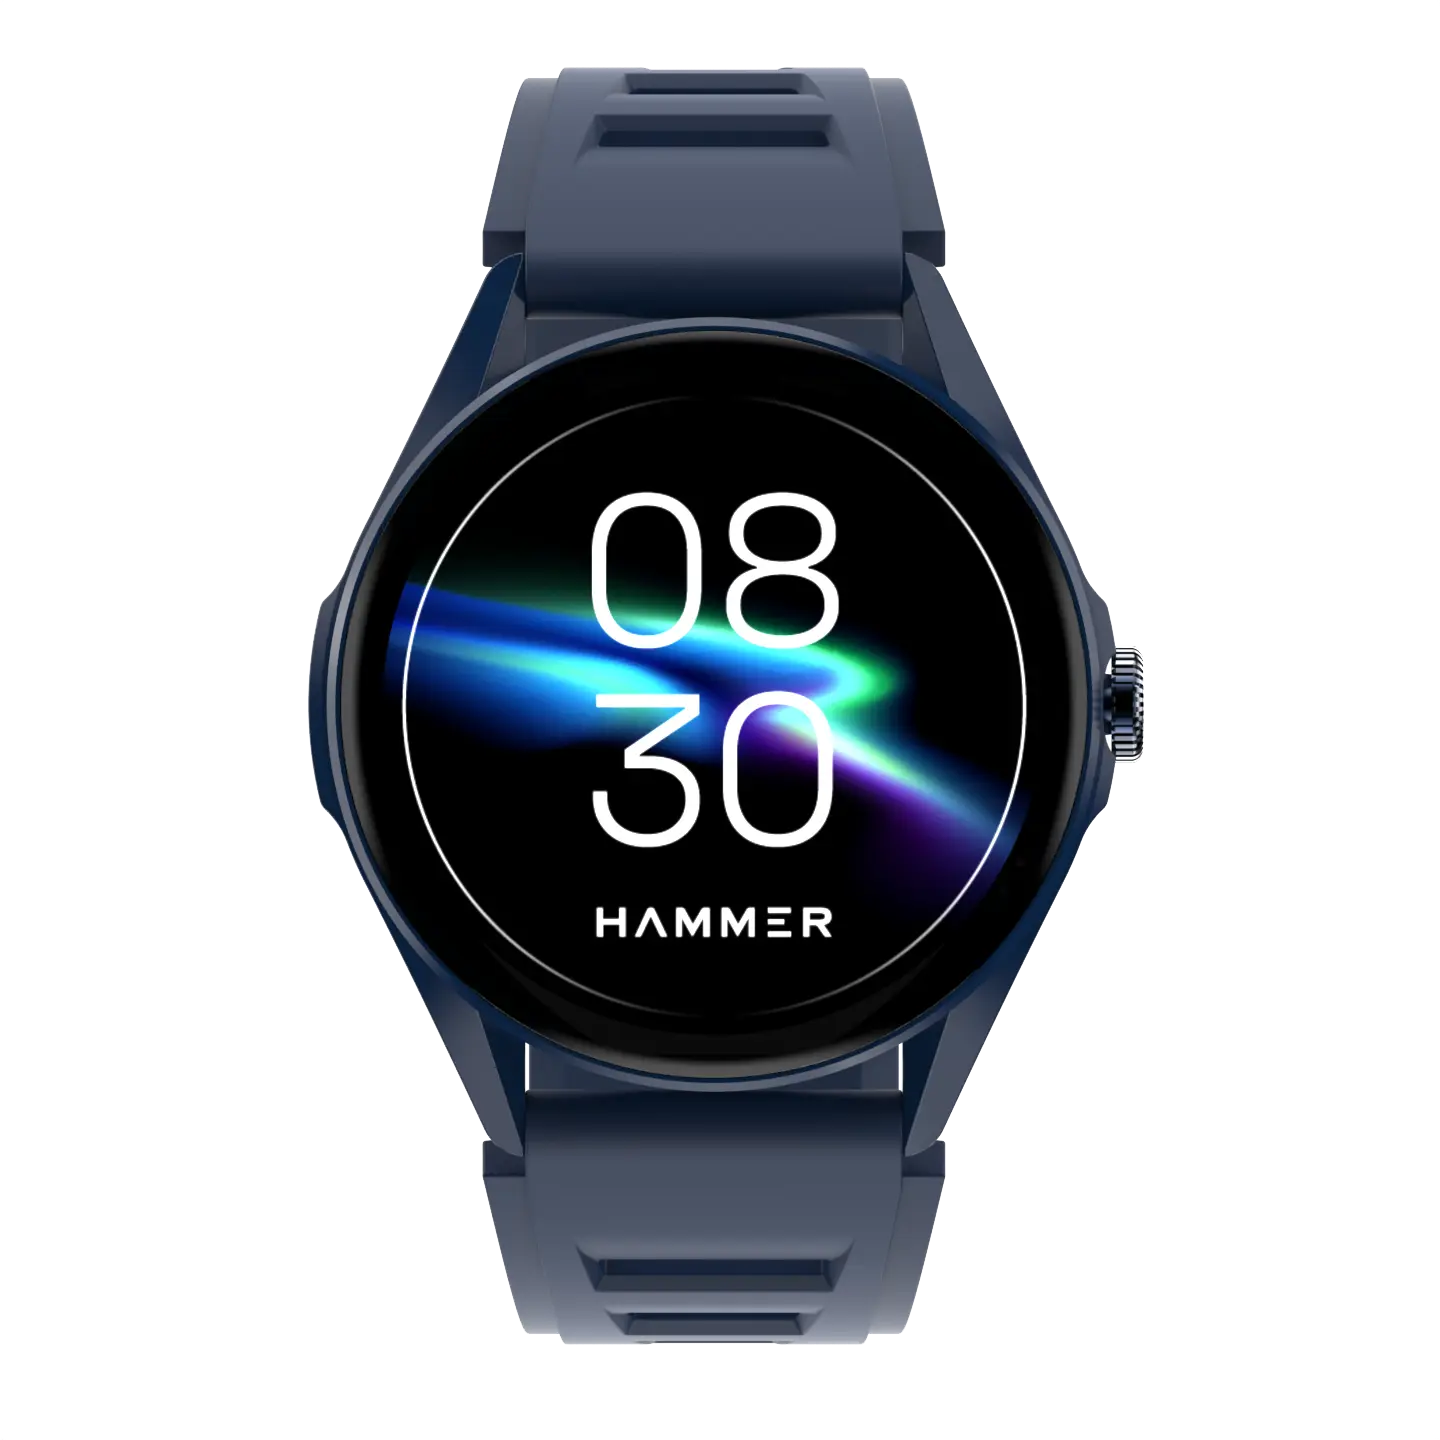 Hammer Cyclone Round dial smart watch with 1.39 inches Big Display  Bluetooth Calling